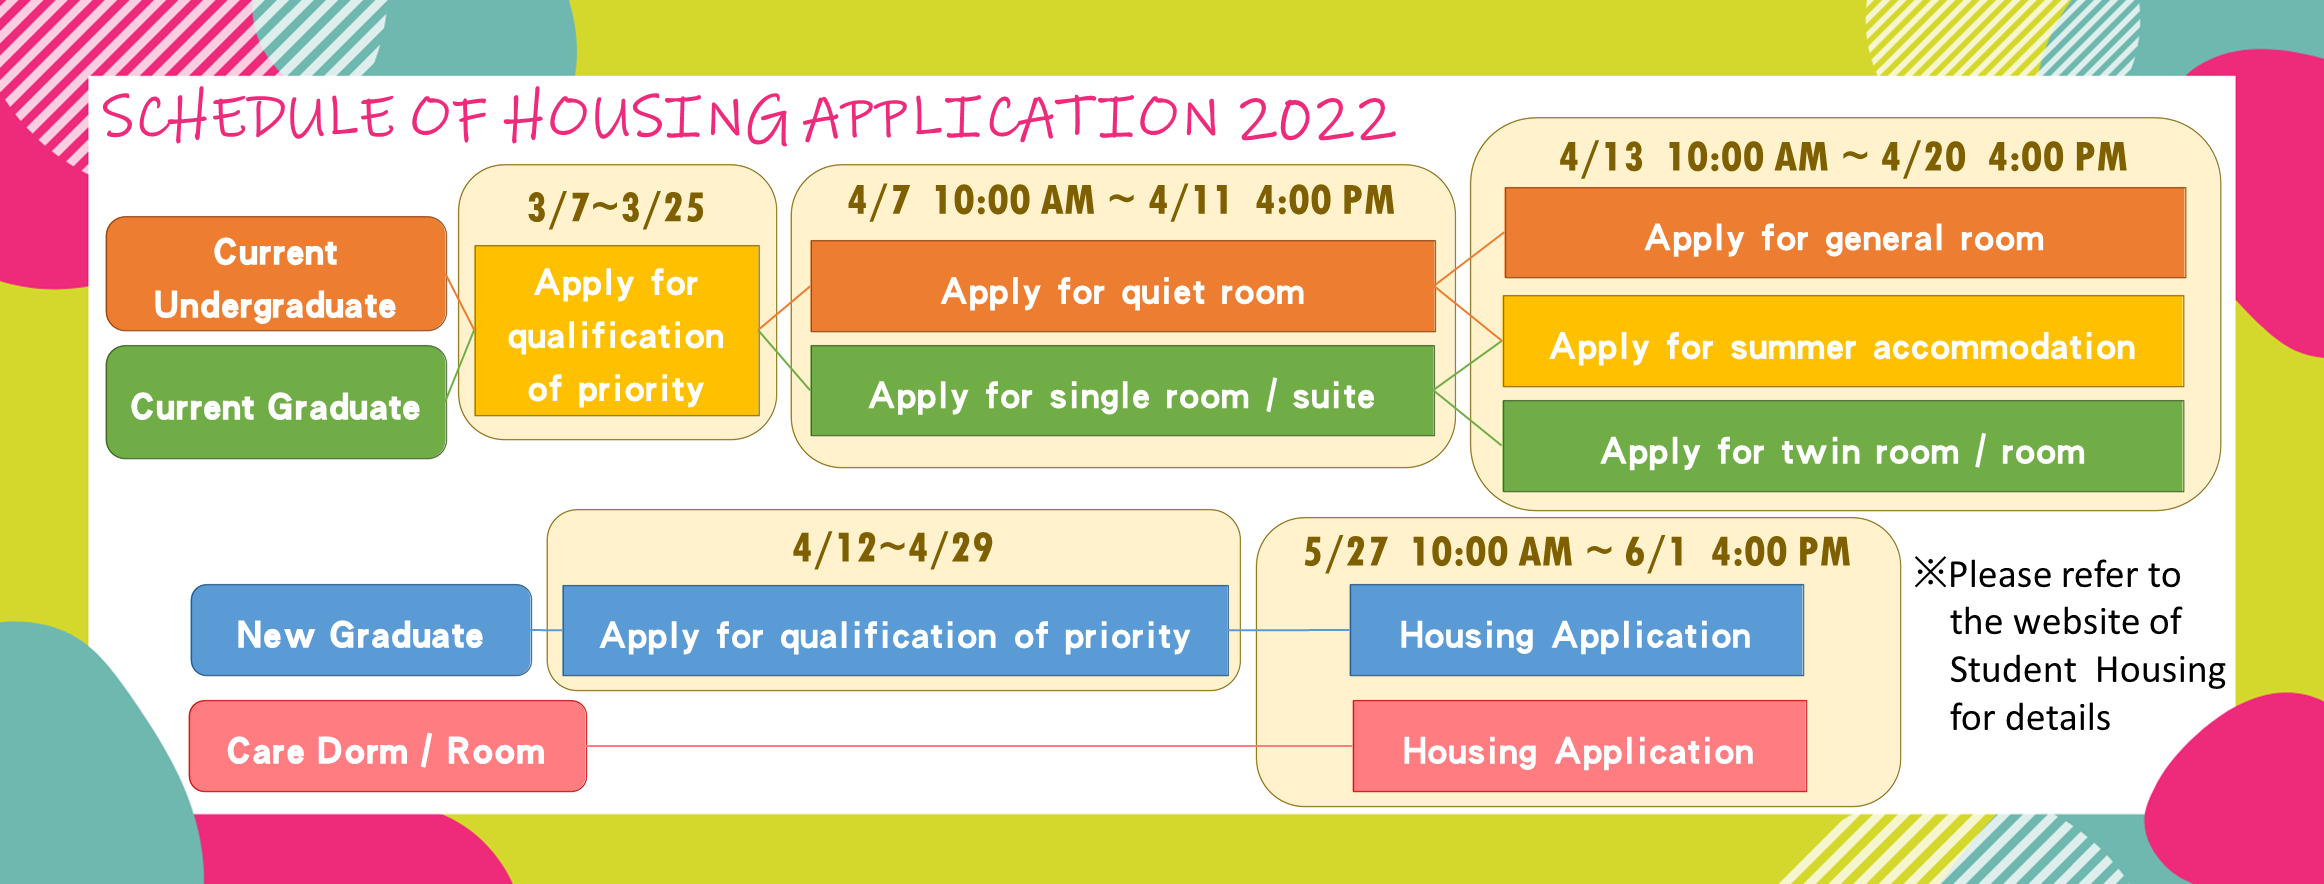 Schedule of Housing Application 2022